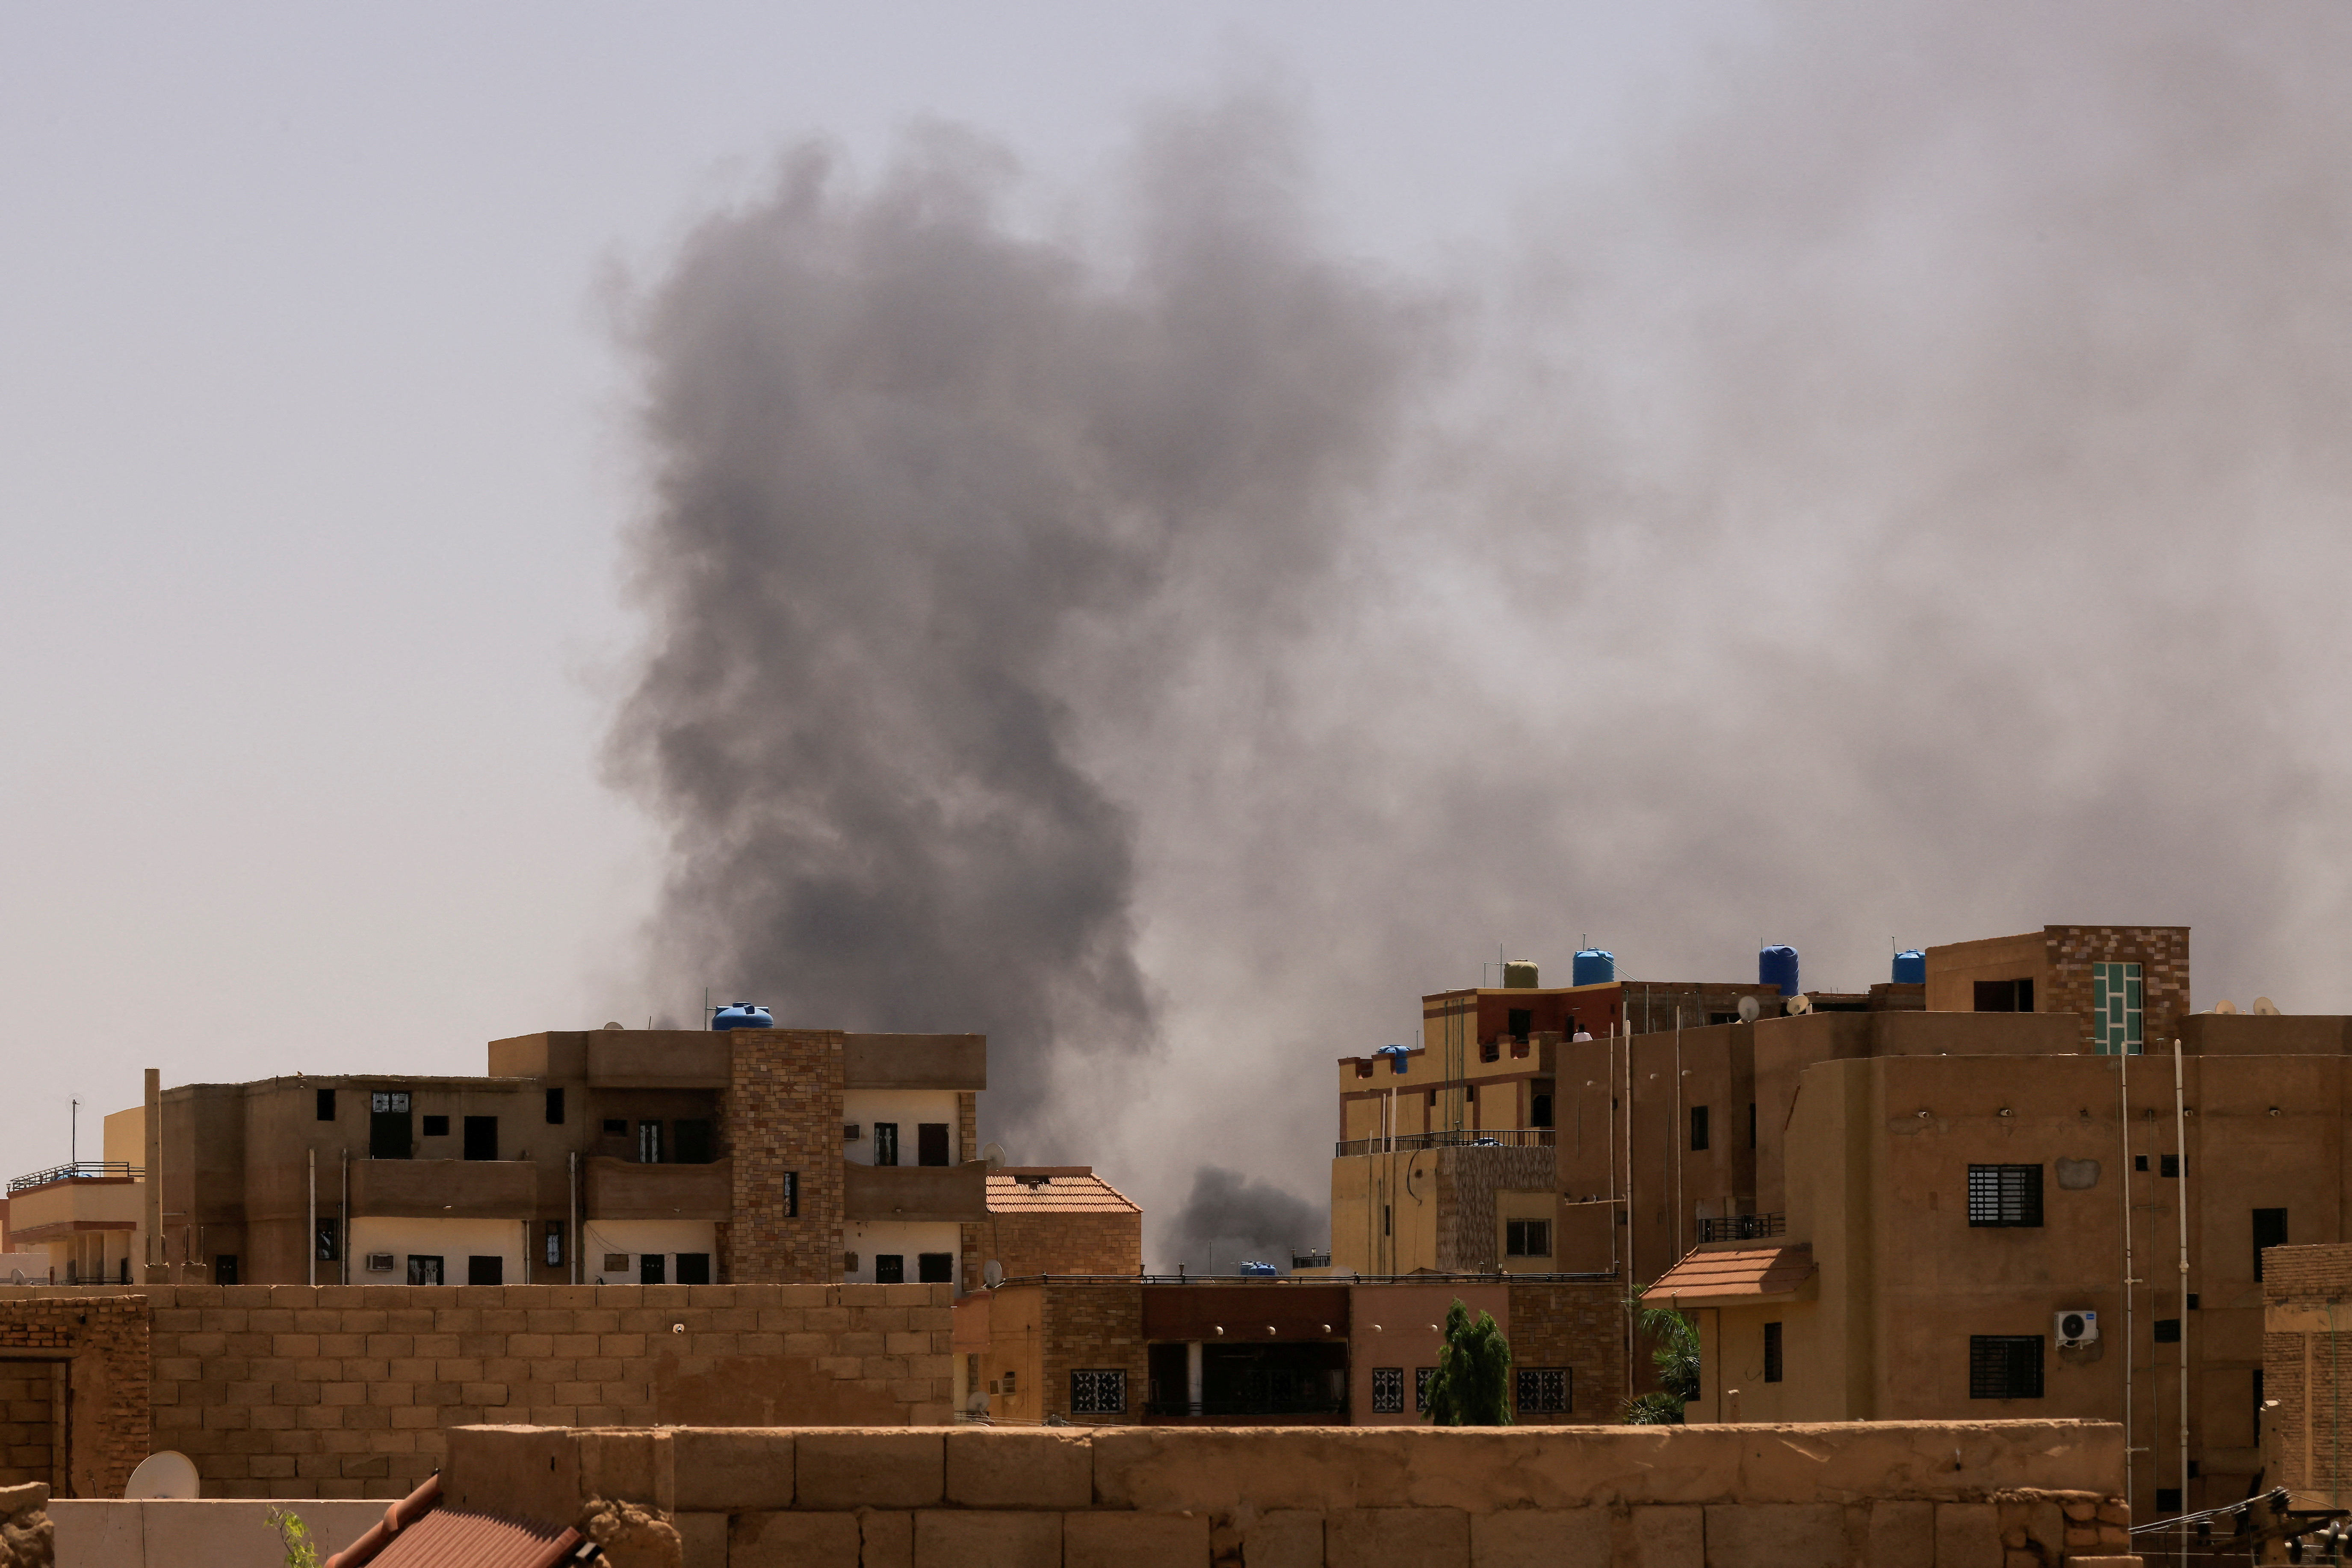 Smoke is seen rise from buildings in Khartoum North